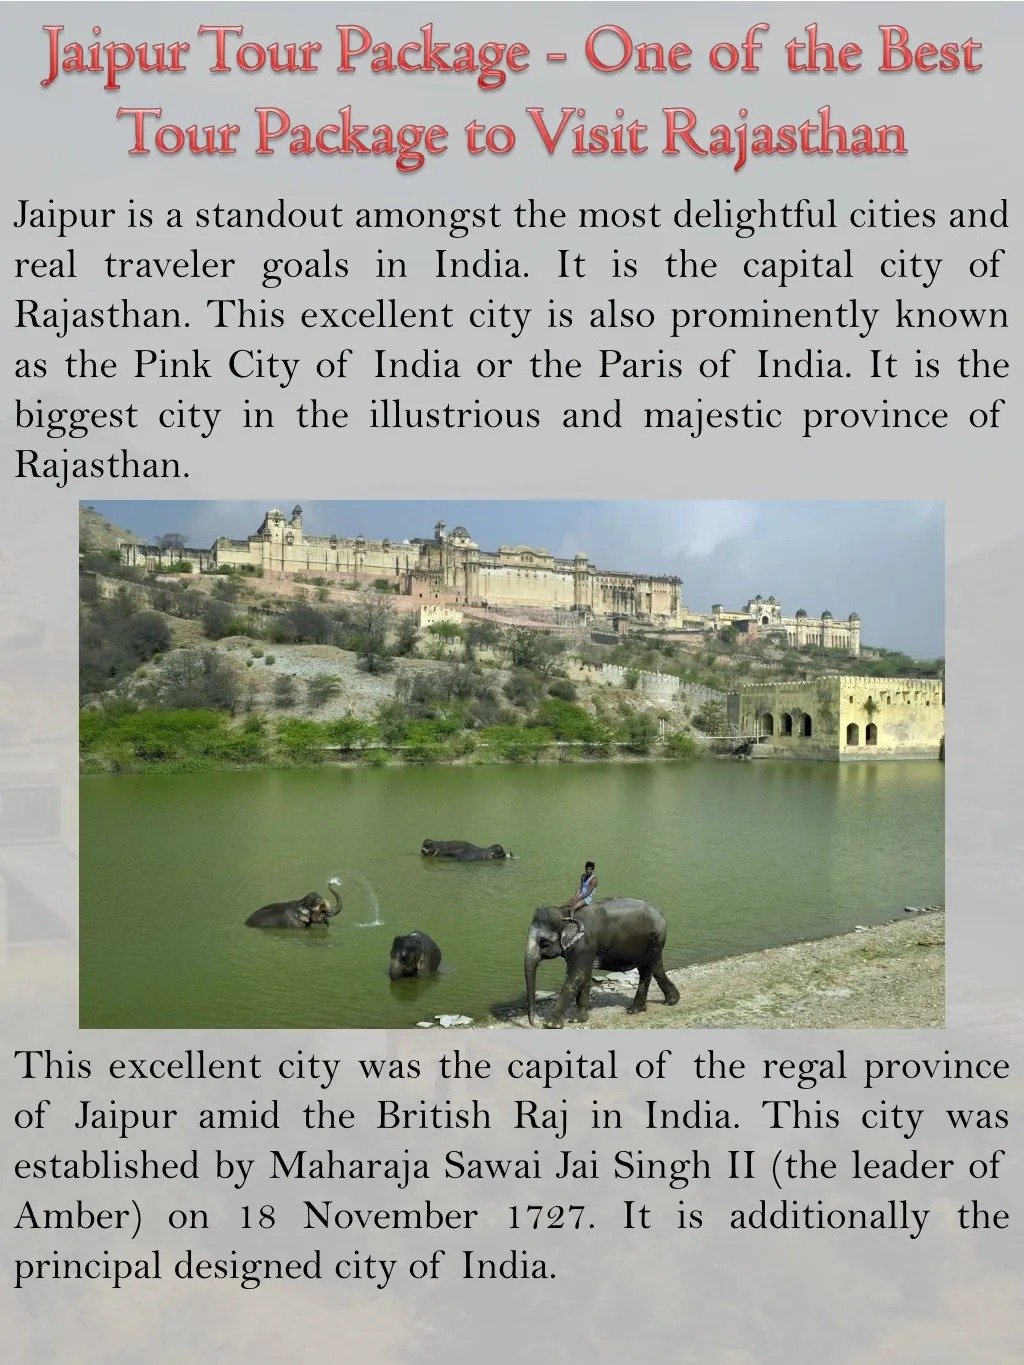 jaipur is a standout amongst the most delightful